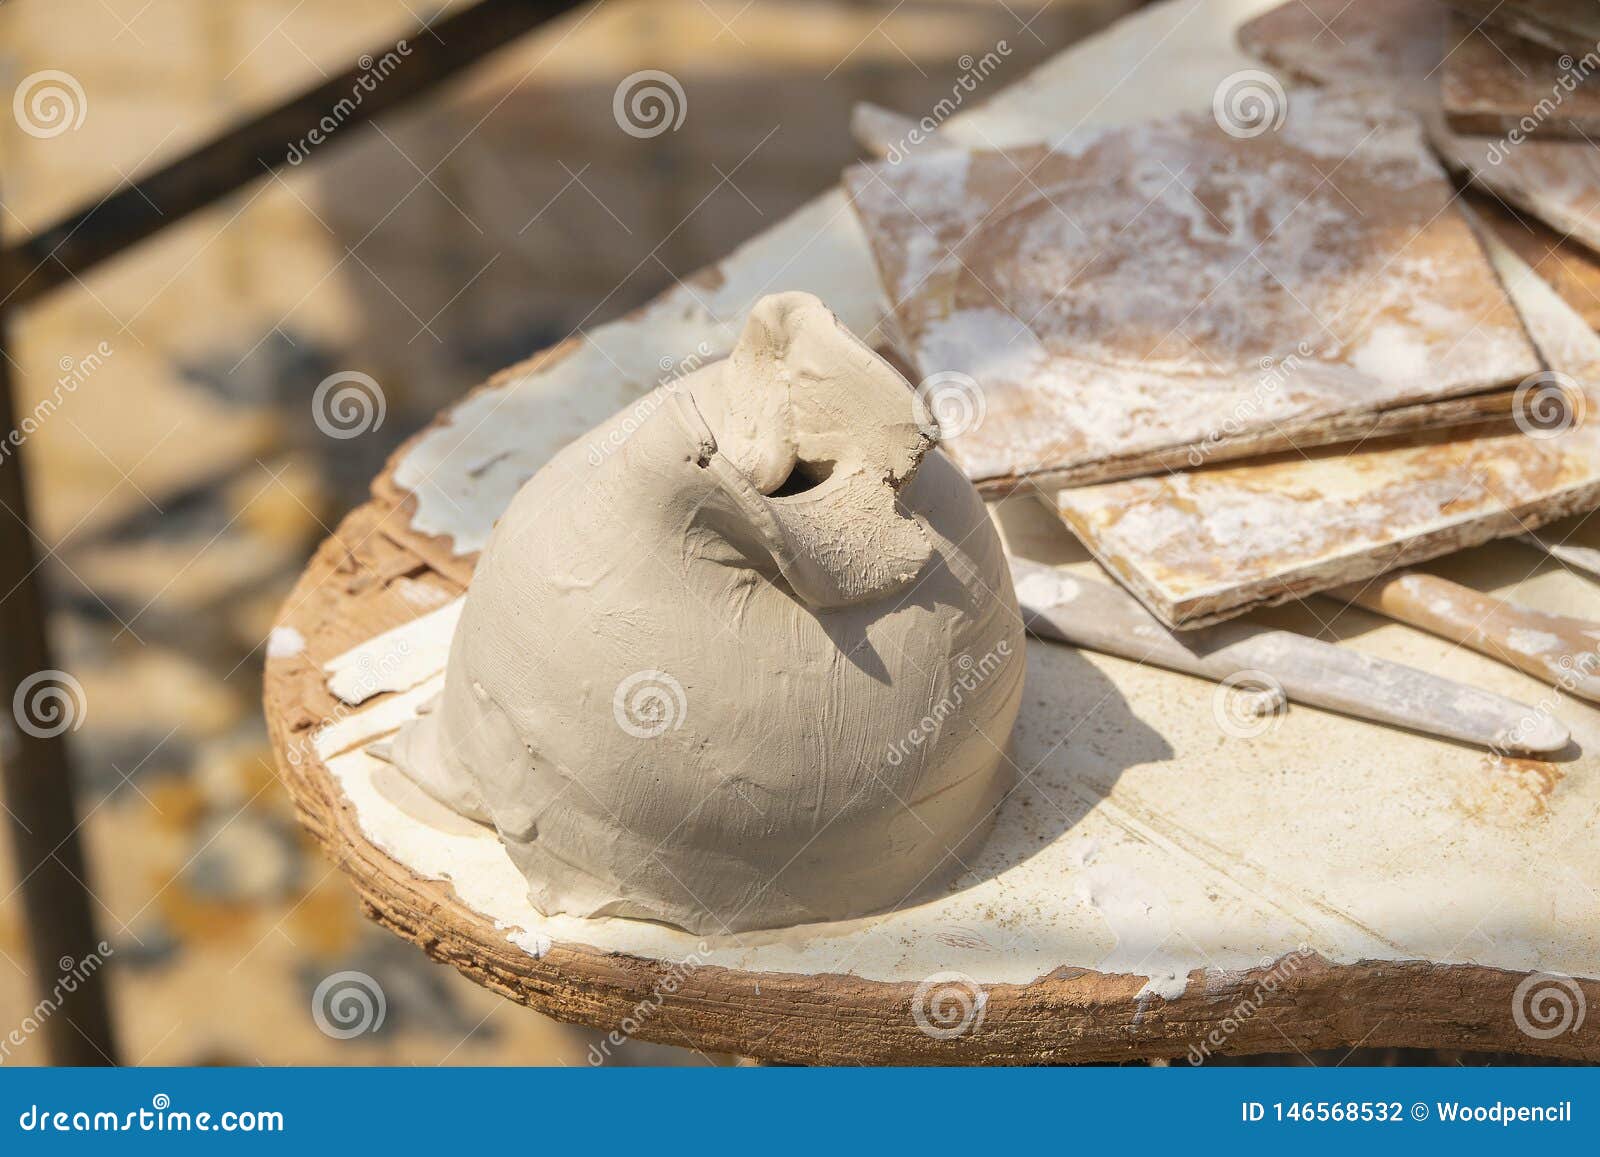 Raw Clay for Pottery Modeling with a Putty Knife and Molding Tools